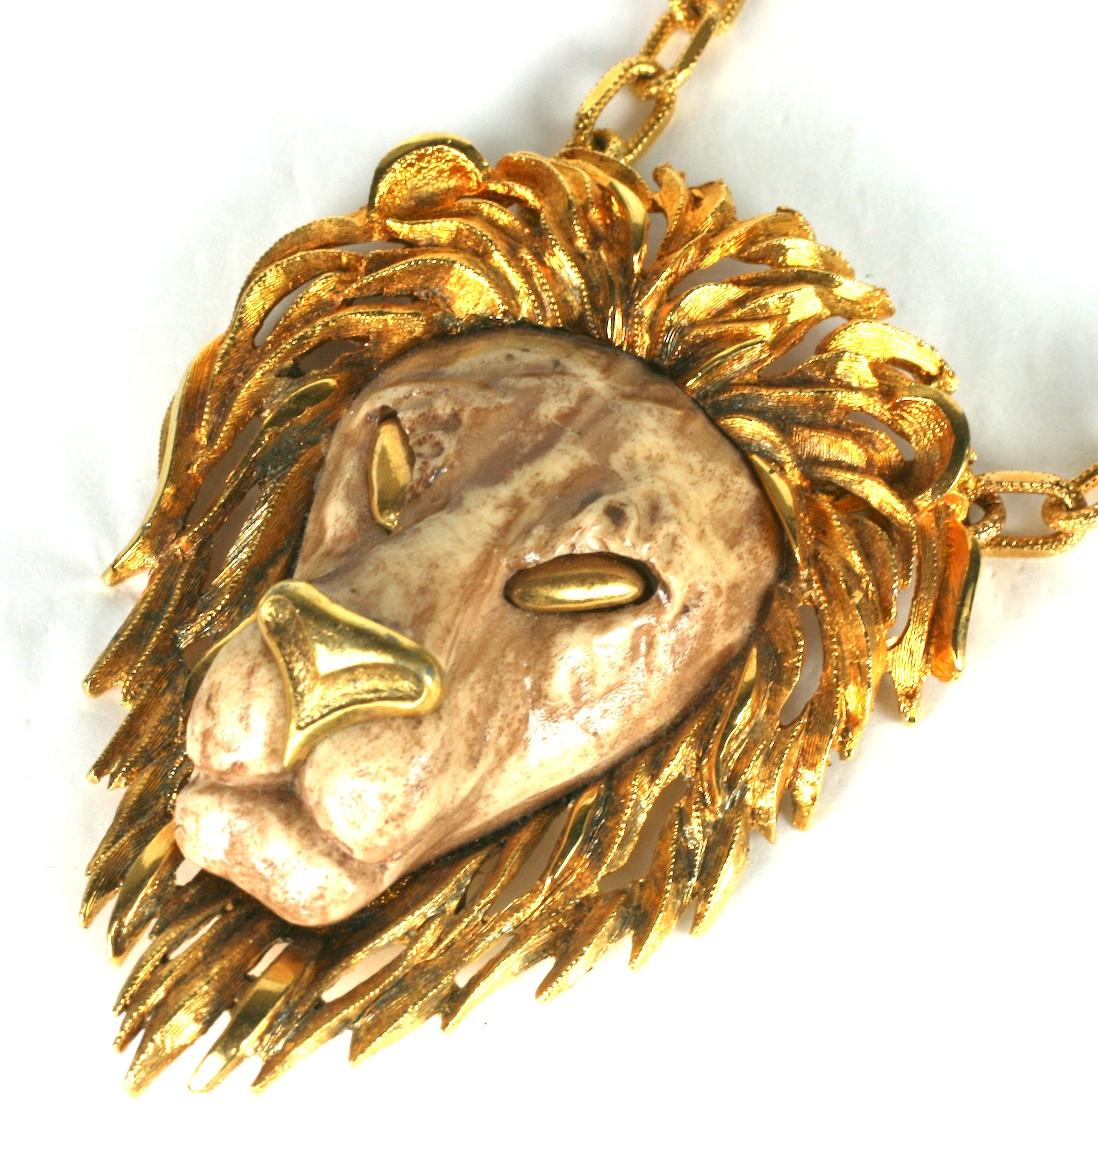 Razza oversized lion head pendant with a prominent mane of molded resin and gilt metal.  Gilt  rectangular chain forms pendant necklace. 
Excellent Condition, Unsigned. 
Pendant Length: 4 1/4